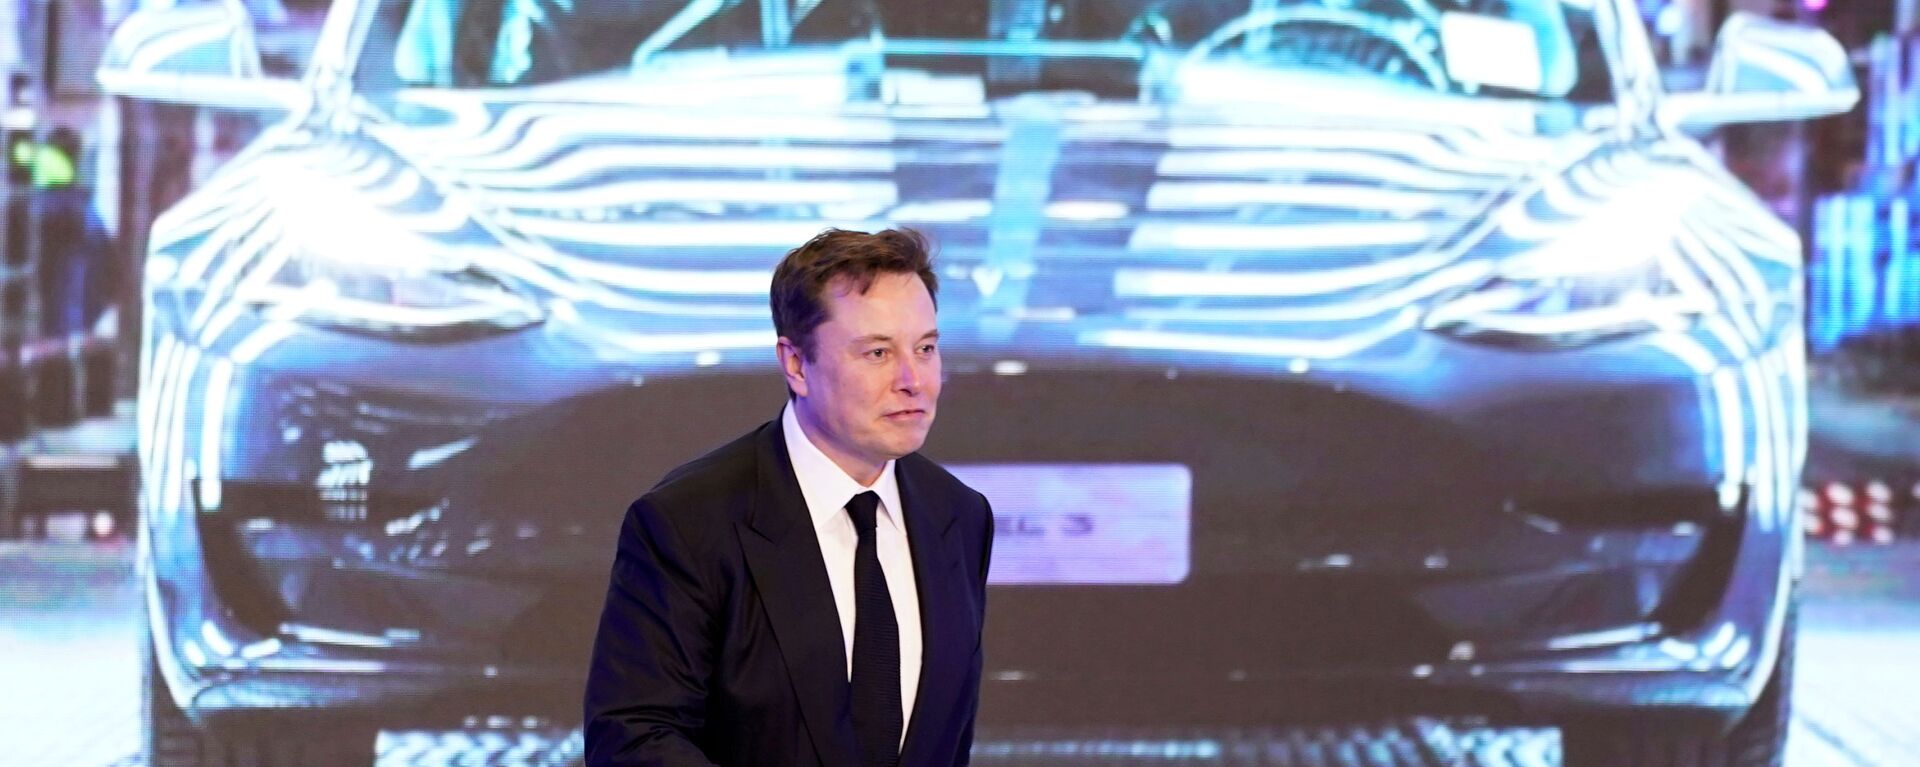 Tesla Inc CEO Elon Musk walks next to a screen showing an image of Tesla Model 3 car during an opening ceremony for Tesla China-made Model Y program in Shanghai, China January 7, 2020. - Sputnik International, 1920, 09.12.2021